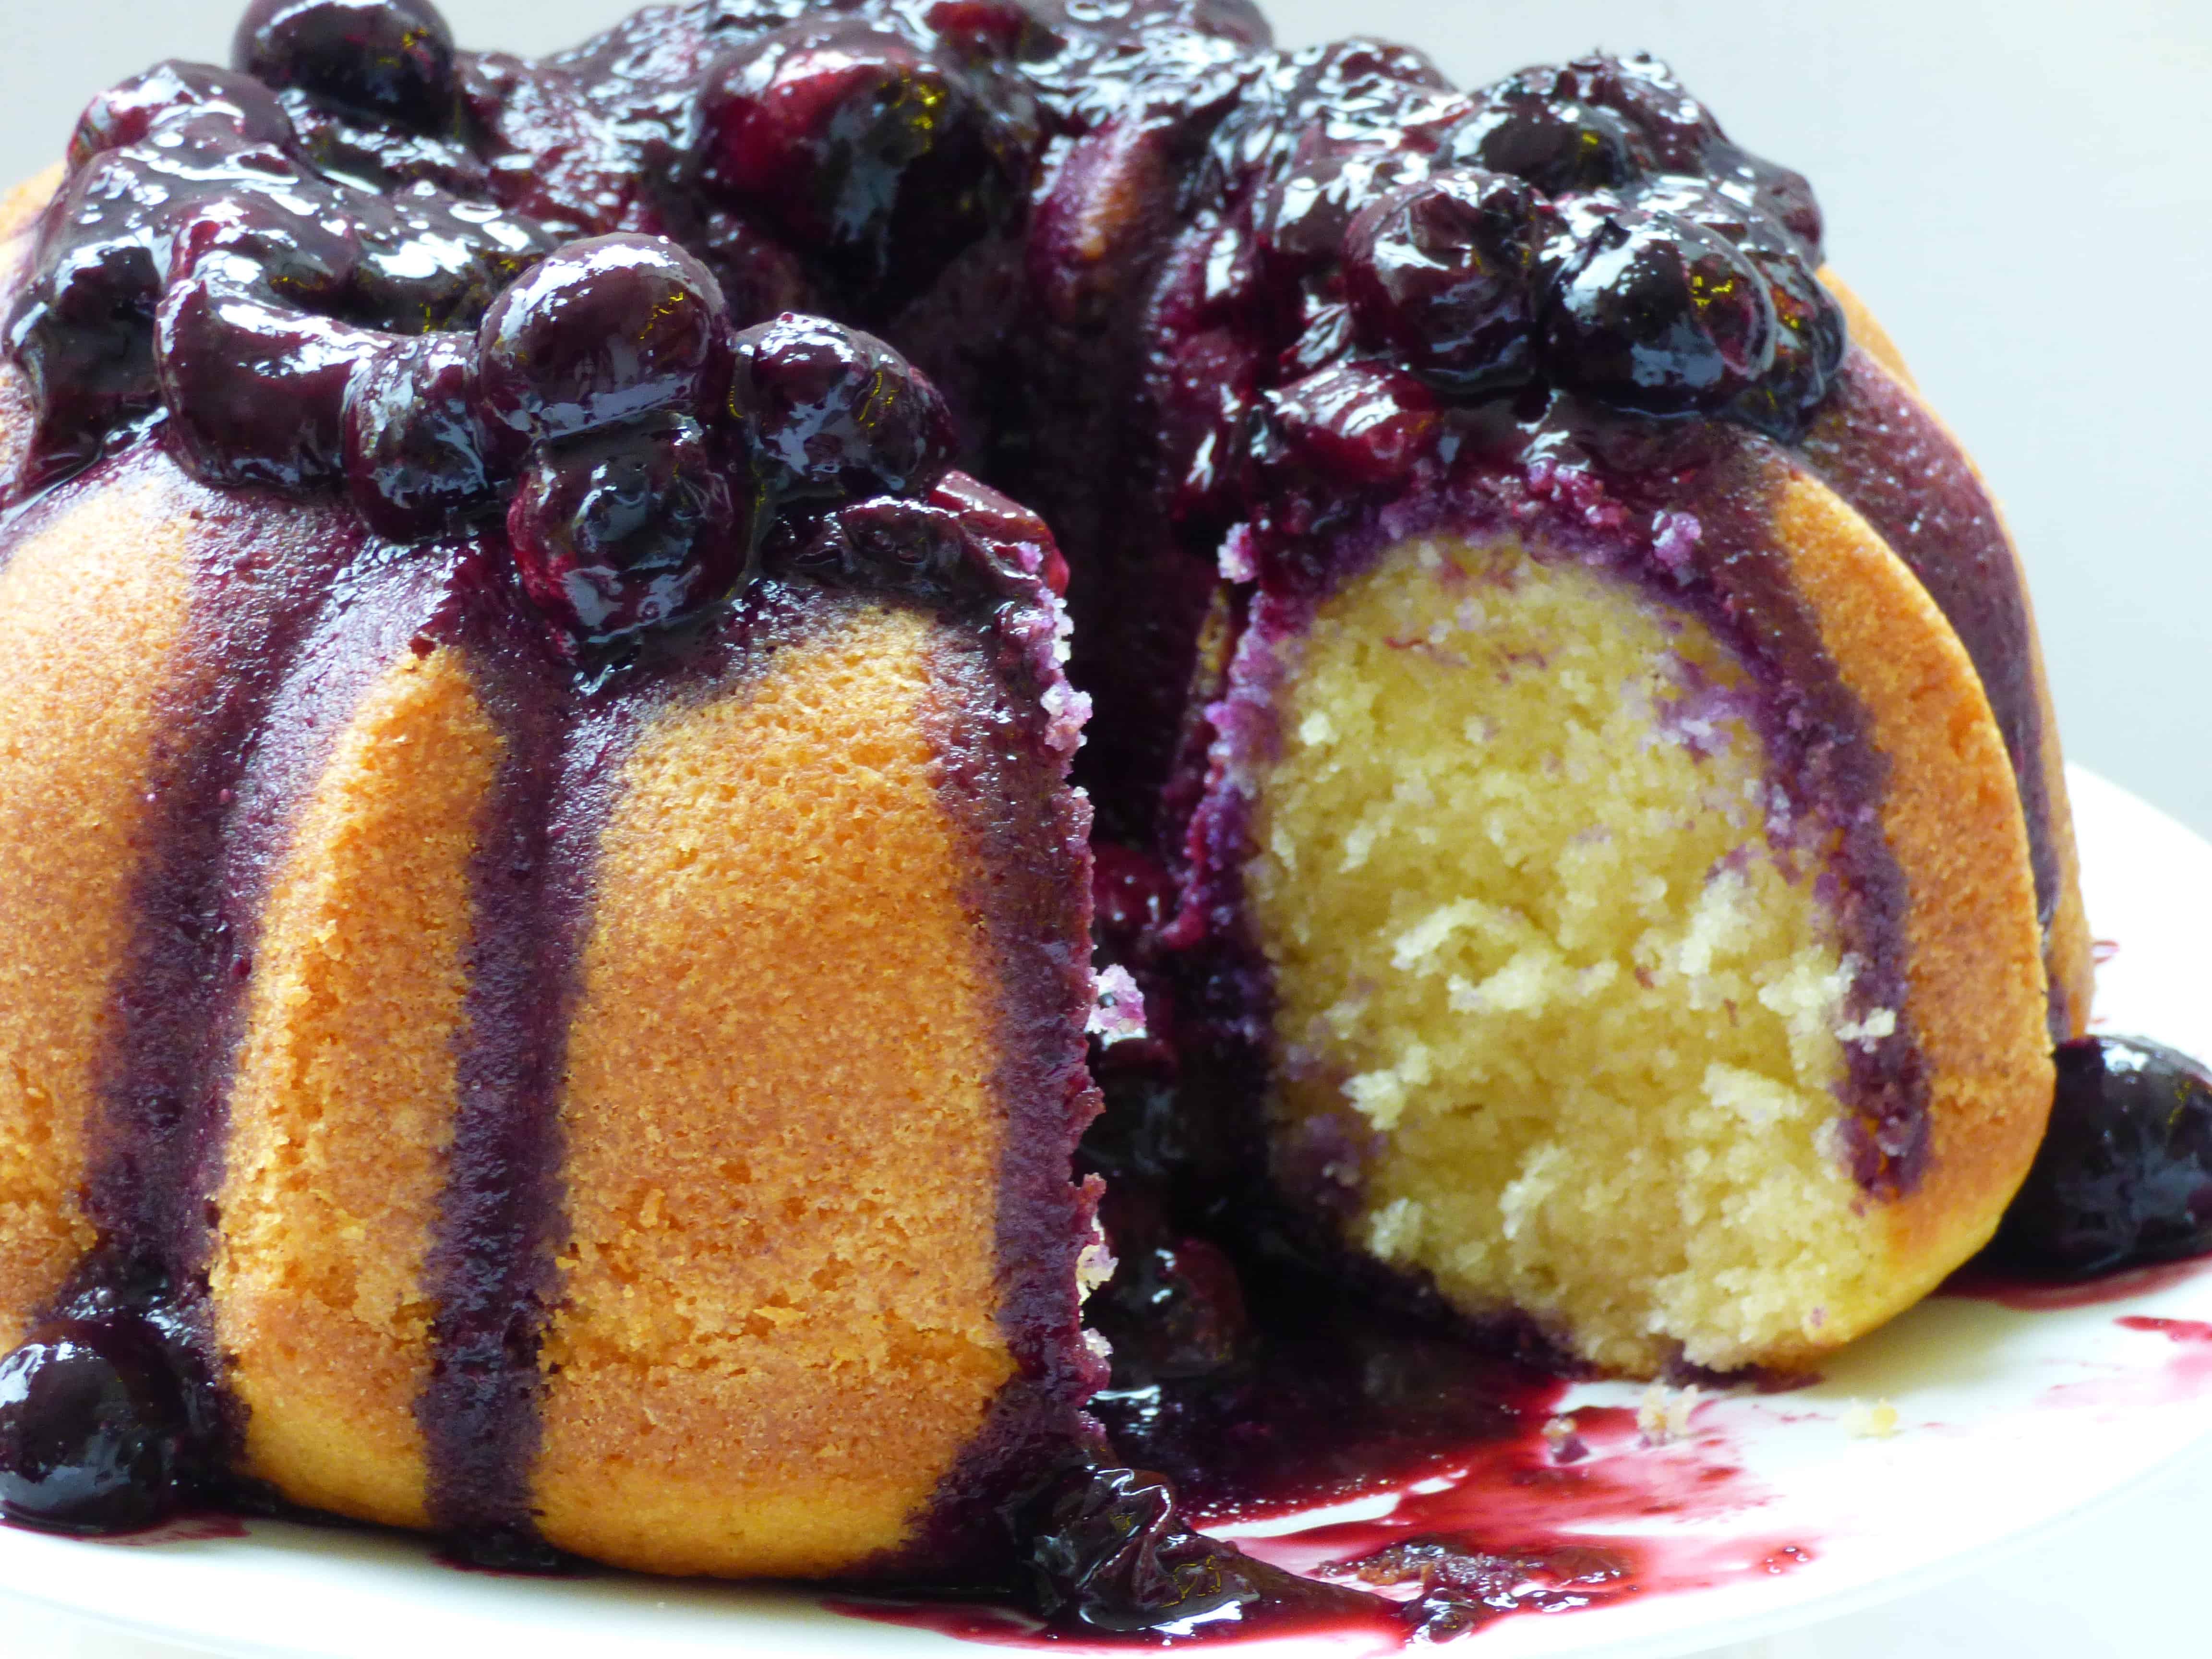 Vanilla Bundt Cake with a blueberry sauce on a white plate.